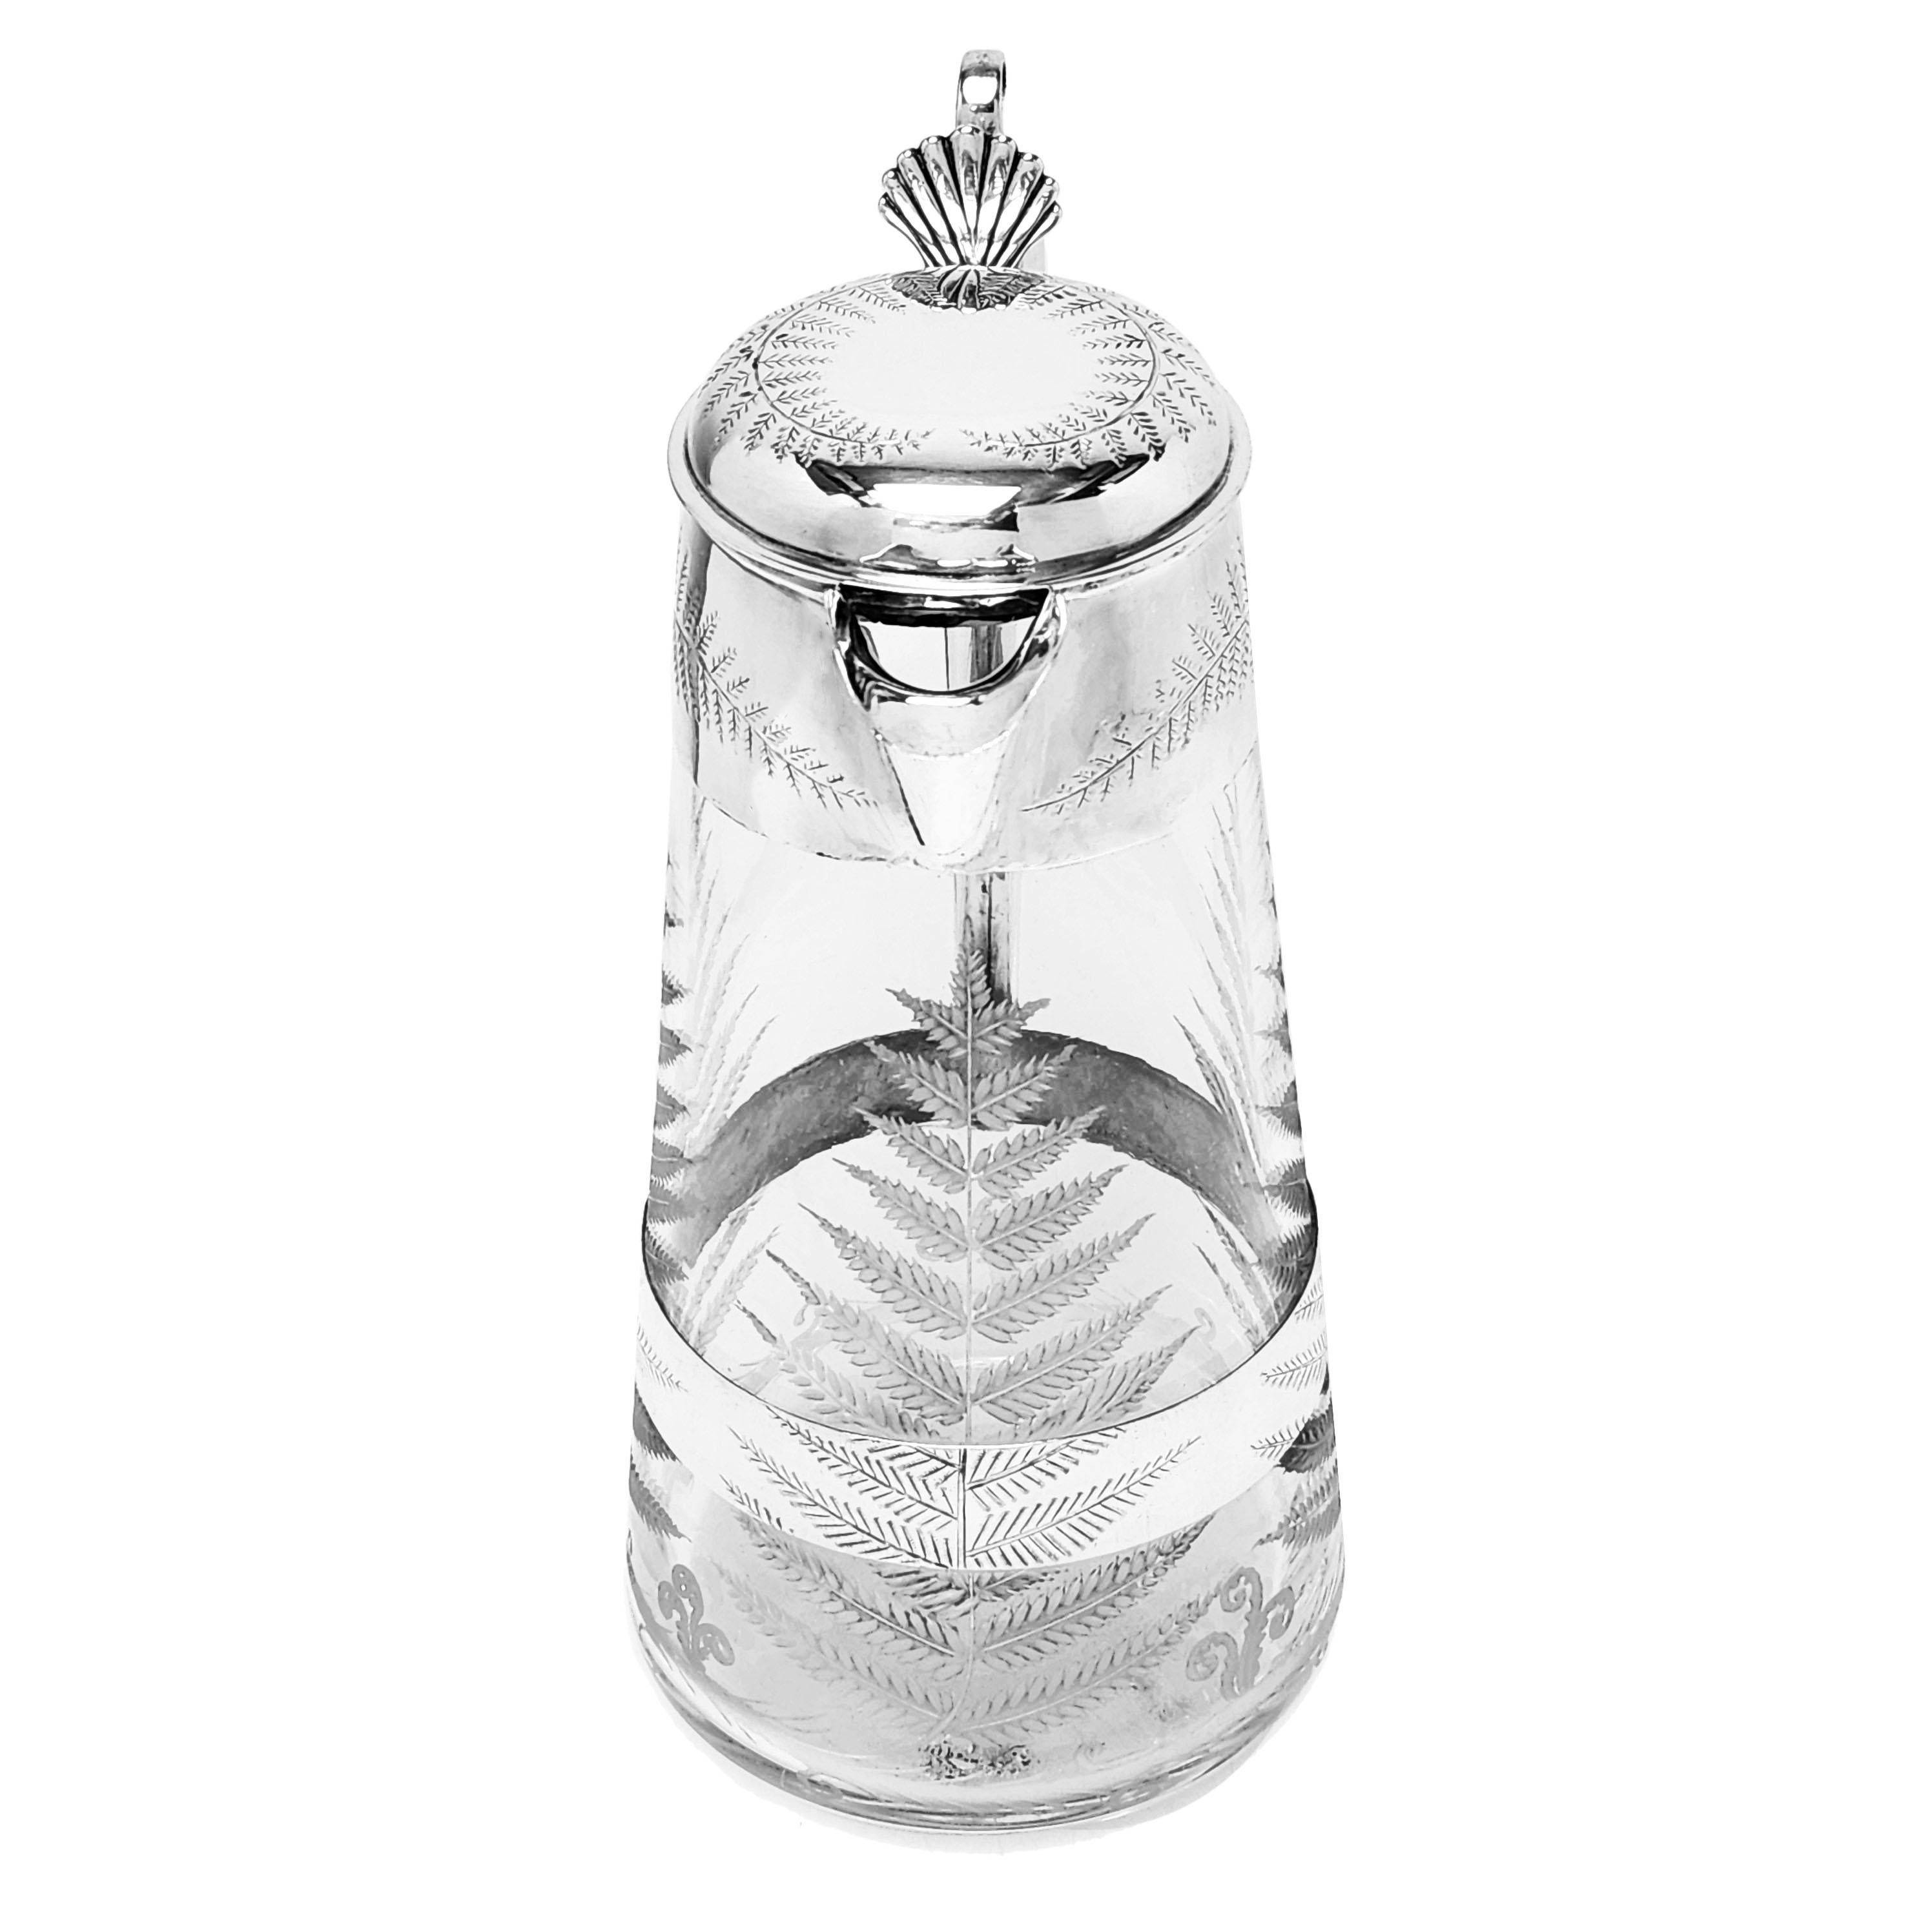 English Antique Victorian Sterling Silver & Etched Glass Claret Jug Wine Decanter 1865 For Sale